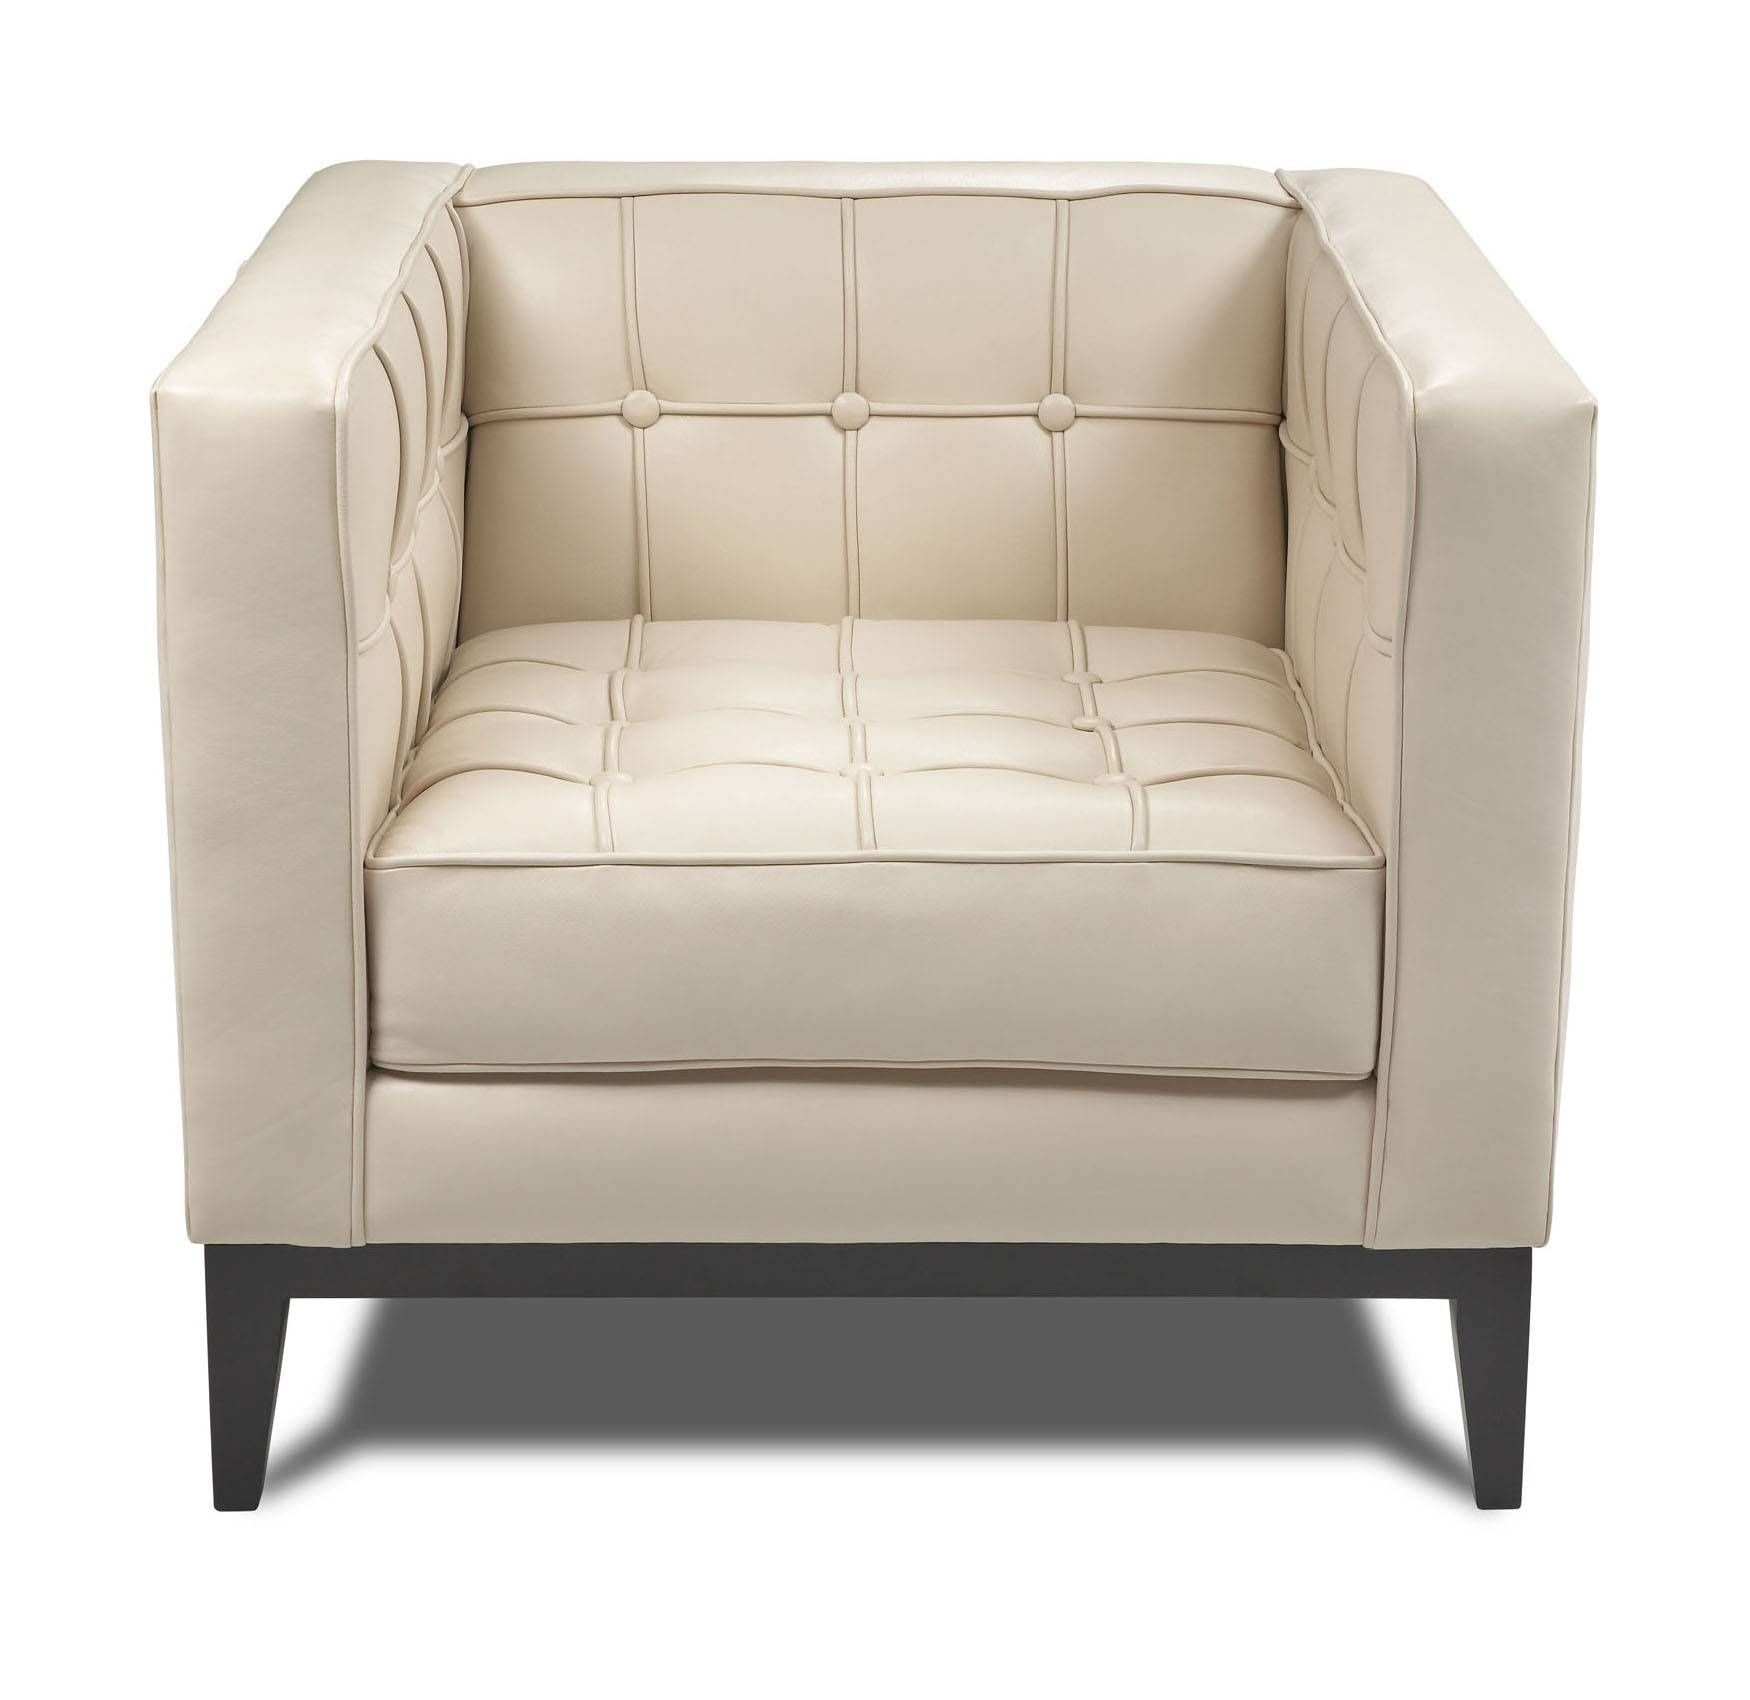 American Leather Luxe Sofa & Ottoman | Modern Design Intended For Luxe Sofas (View 7 of 15)